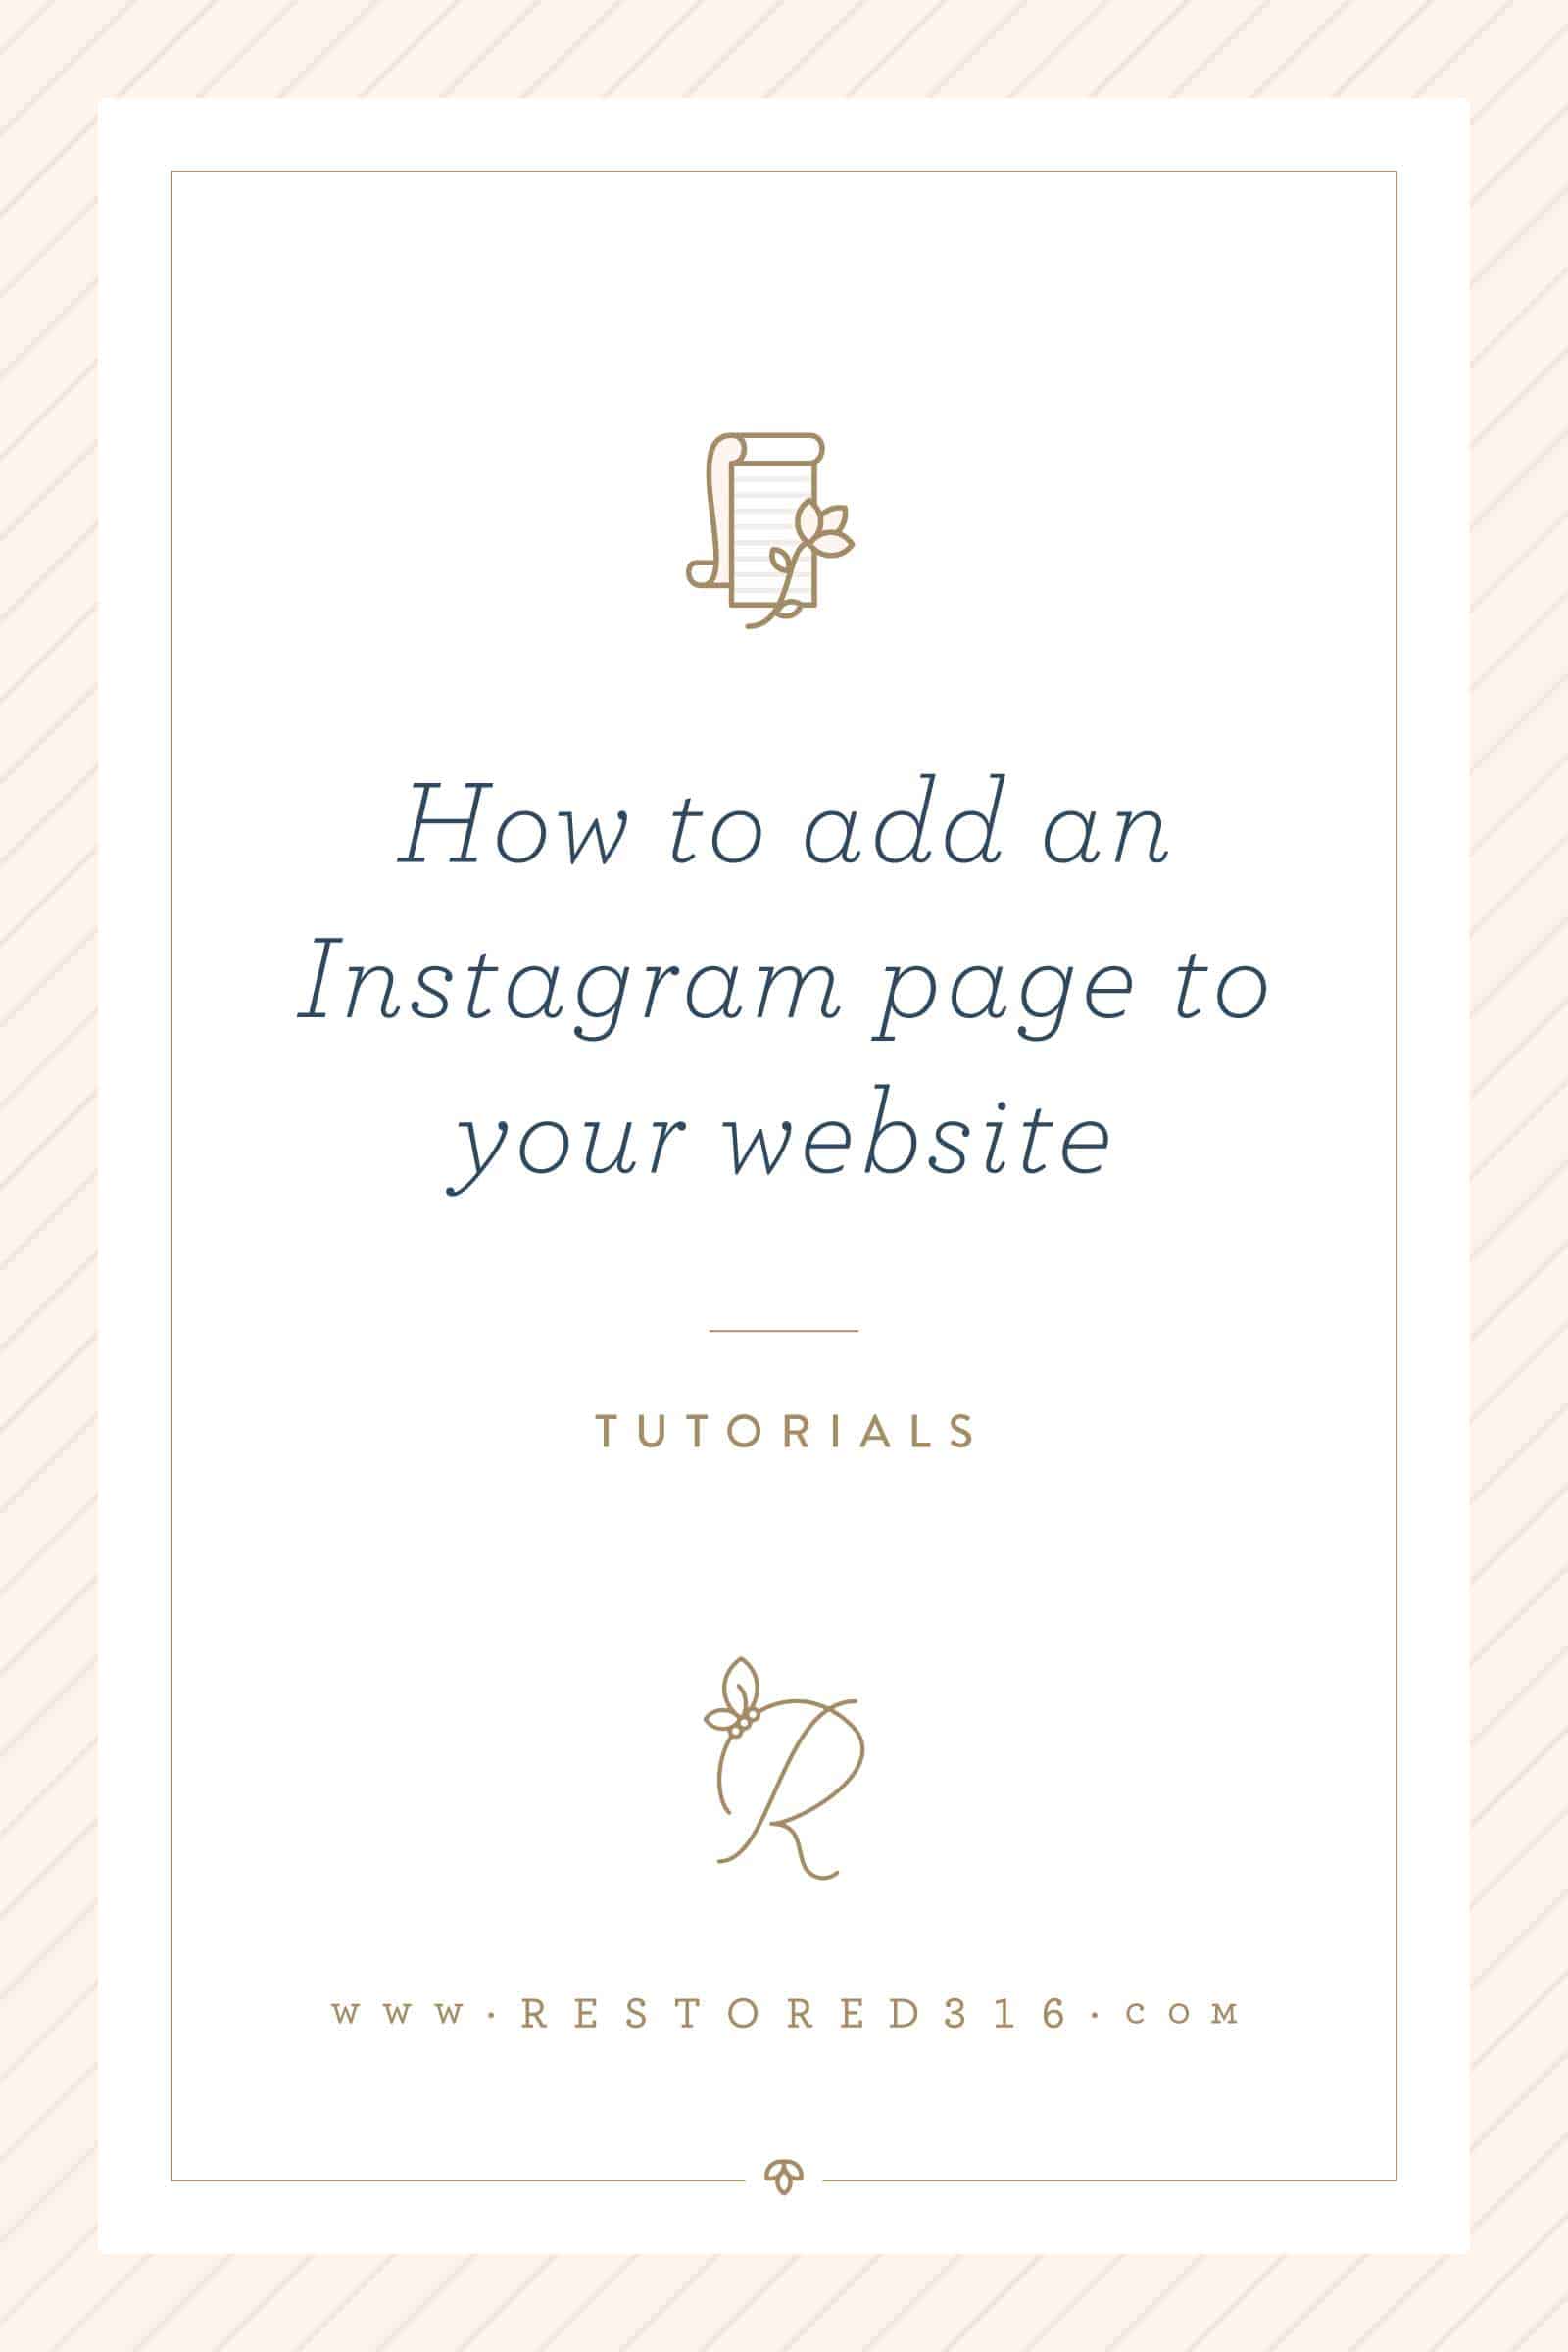 How to add an Instagram page to your website